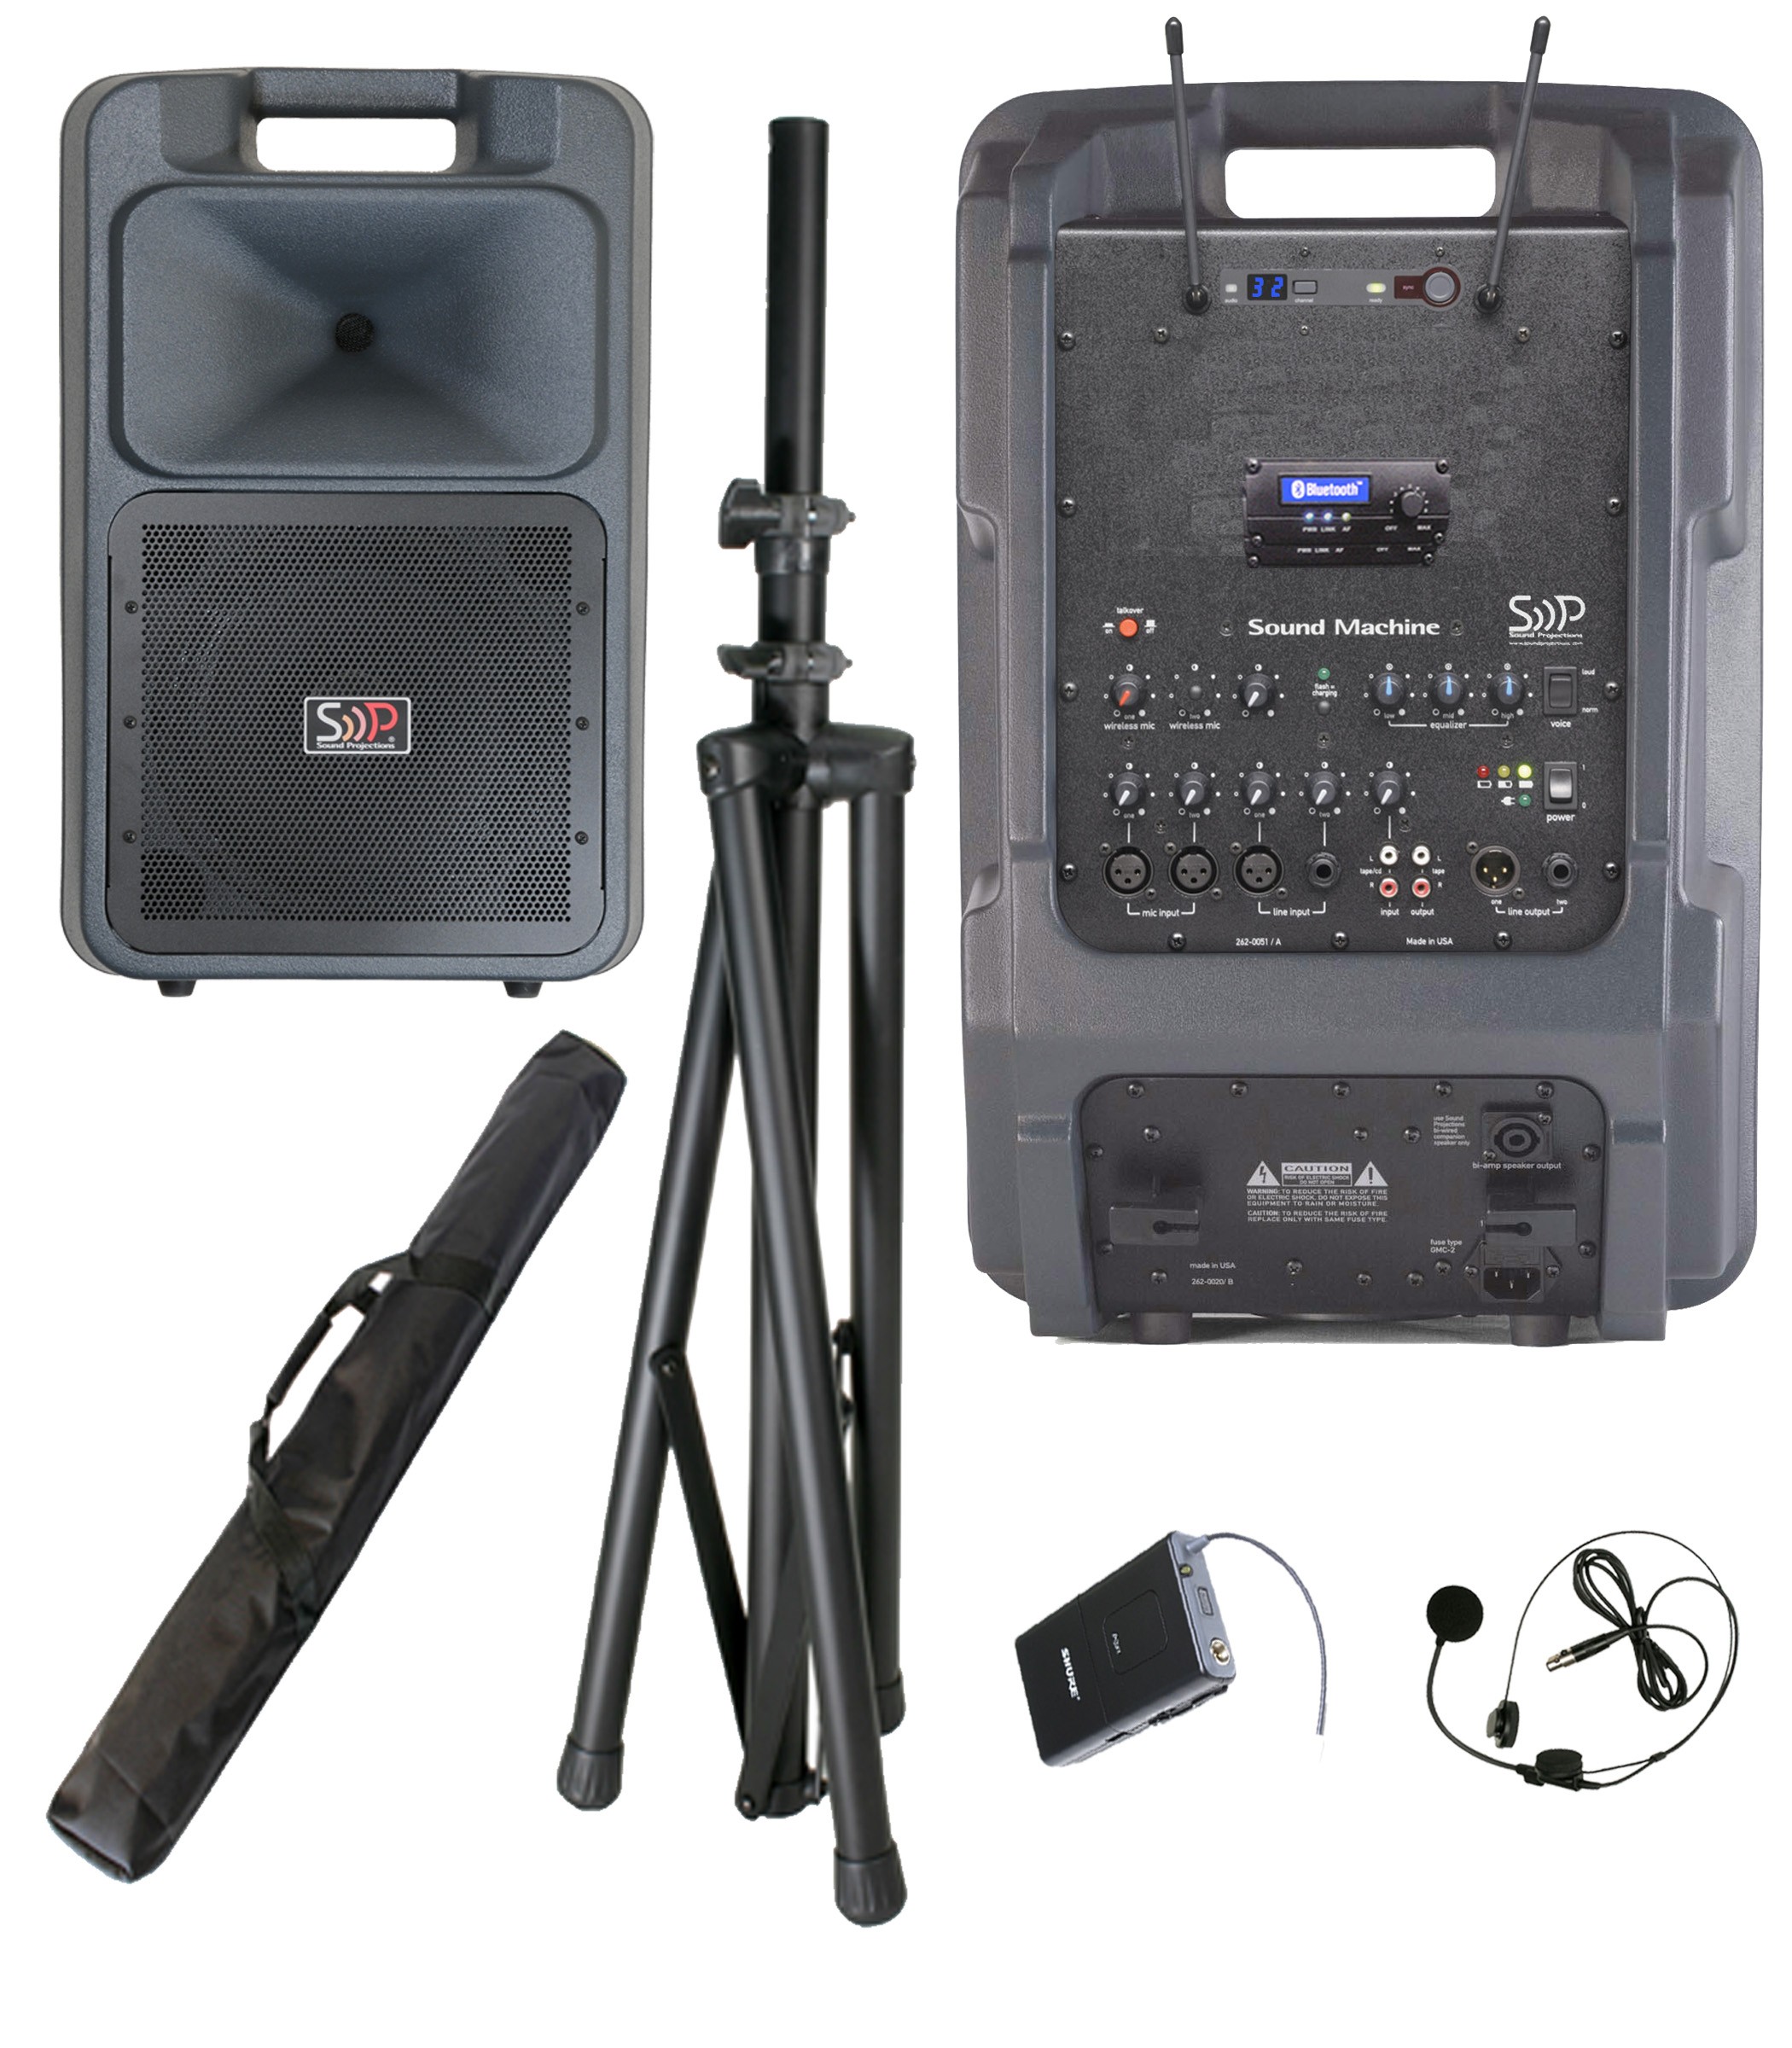 Sound Projections SM-5 with 60ch. Digital headset wireless OPT-600 BlueTooth package